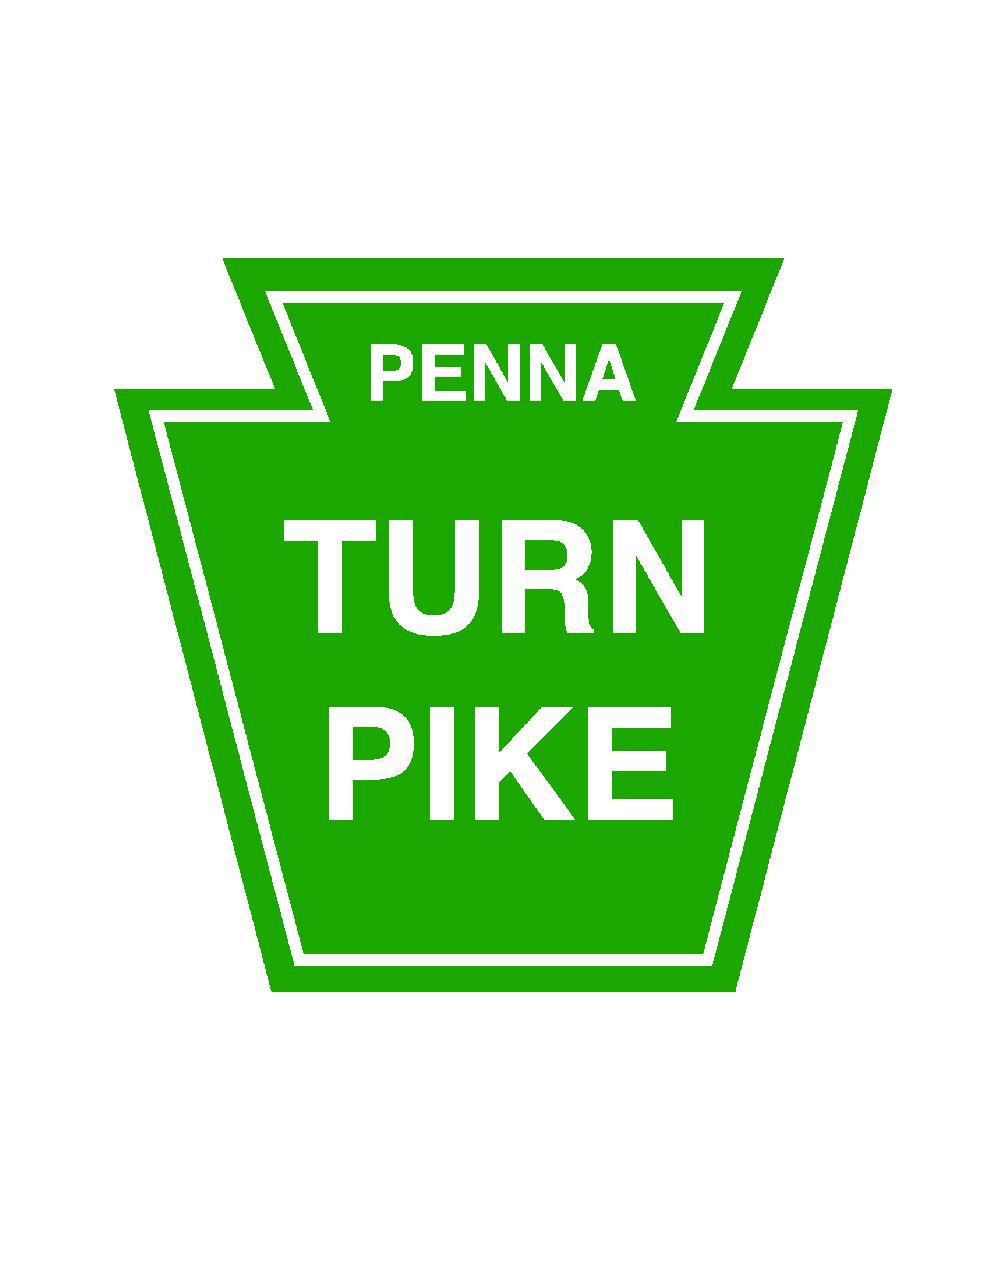 Pennsylvania Turnpike Statewide Total Reconstruction Initiative 1 4 5 8 12 13 14 15 18 19 25 26 CONST. COMPLETED - 110 MILES Milepost 0-10 This project was completed in 2009 for $135 million.